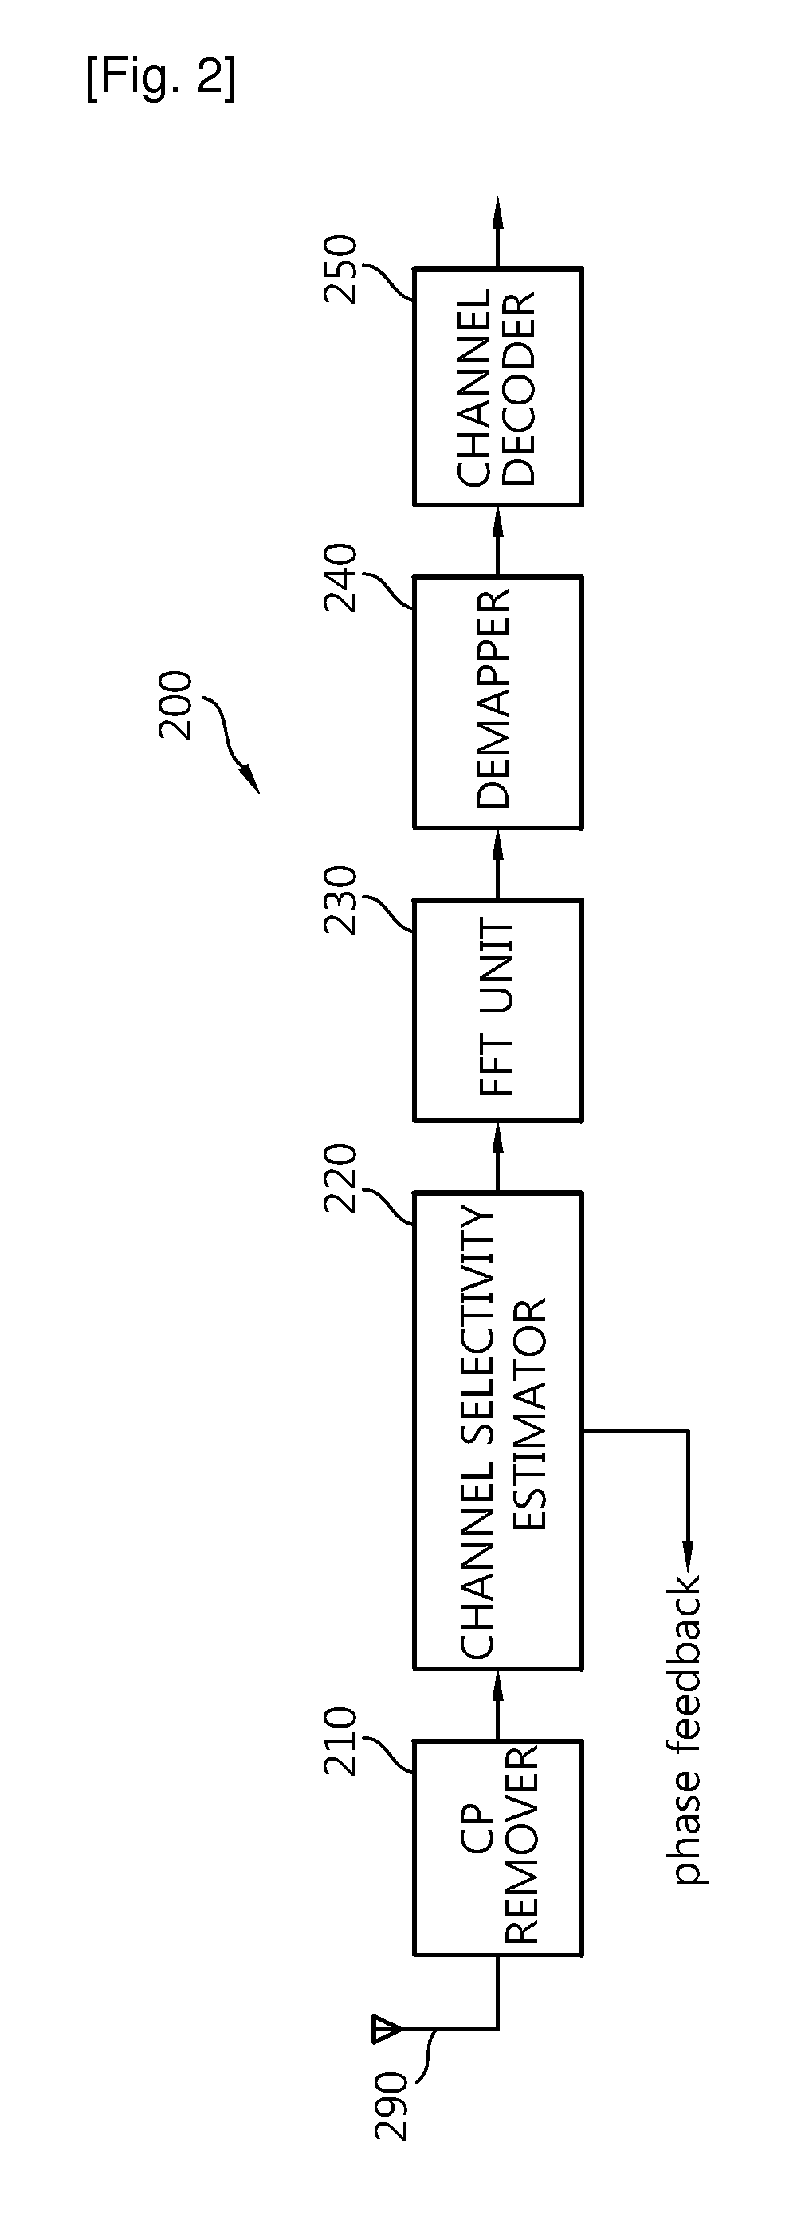 Transmitter for Reducing Channel Selectivity